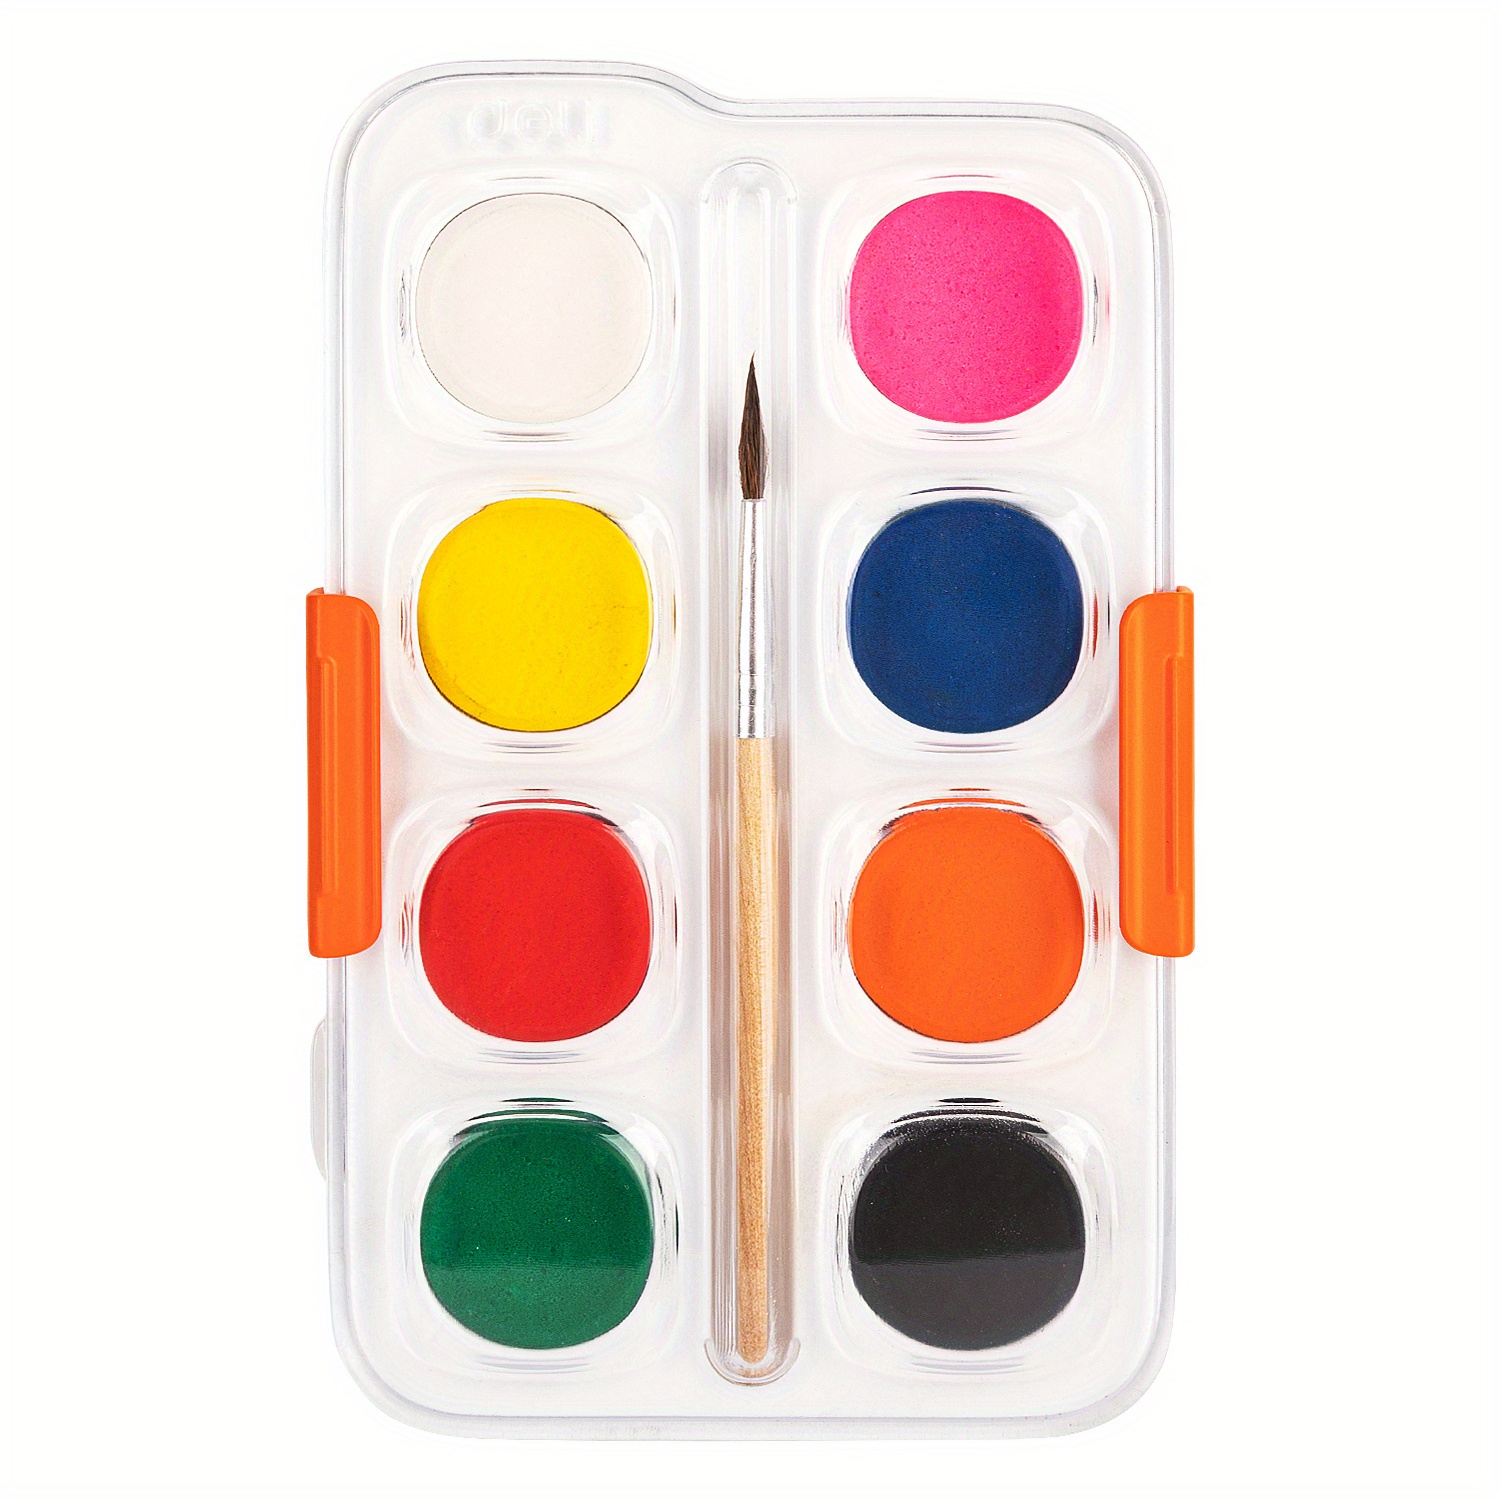 2 Pack Watercolor Paint Set 12 Vivid Colors Includes Watercolour Mixing Palette and 1 Brushe, Perfect for Artists, Beginner Painters, Kids and Adult